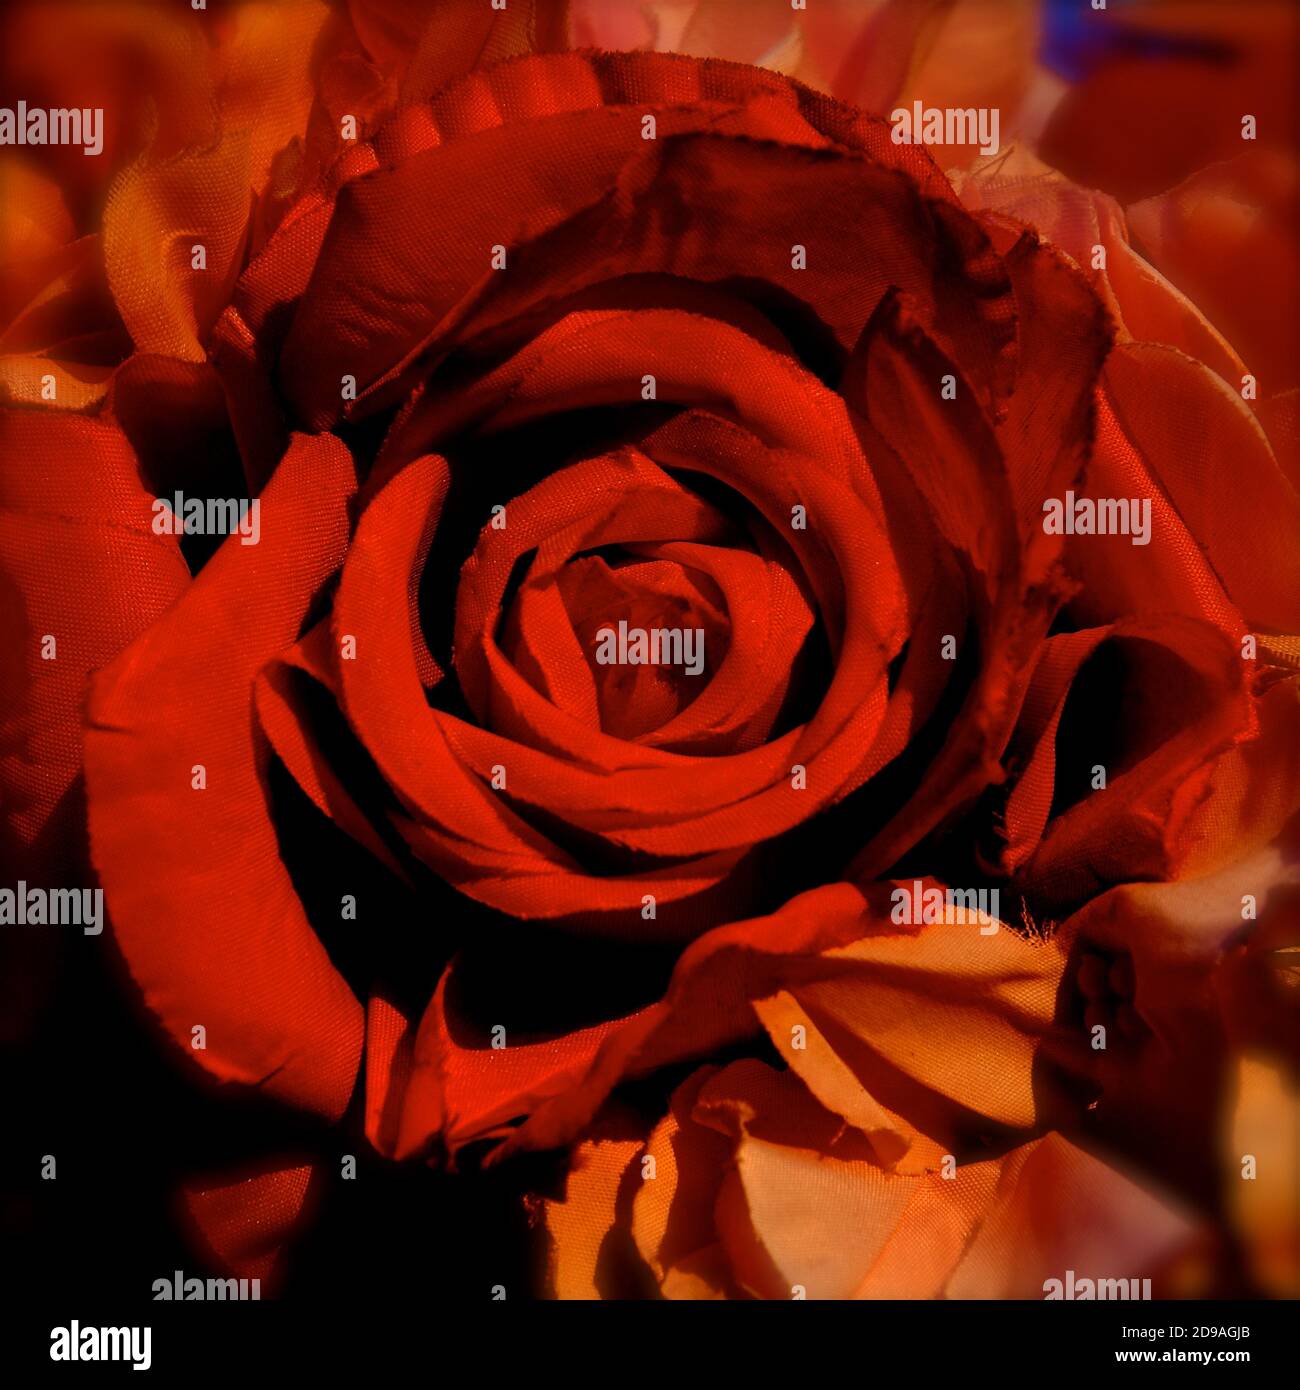 A close up birds eye view of a red rose in full bloom in part of a Valentines day bouquet. Stock Photo